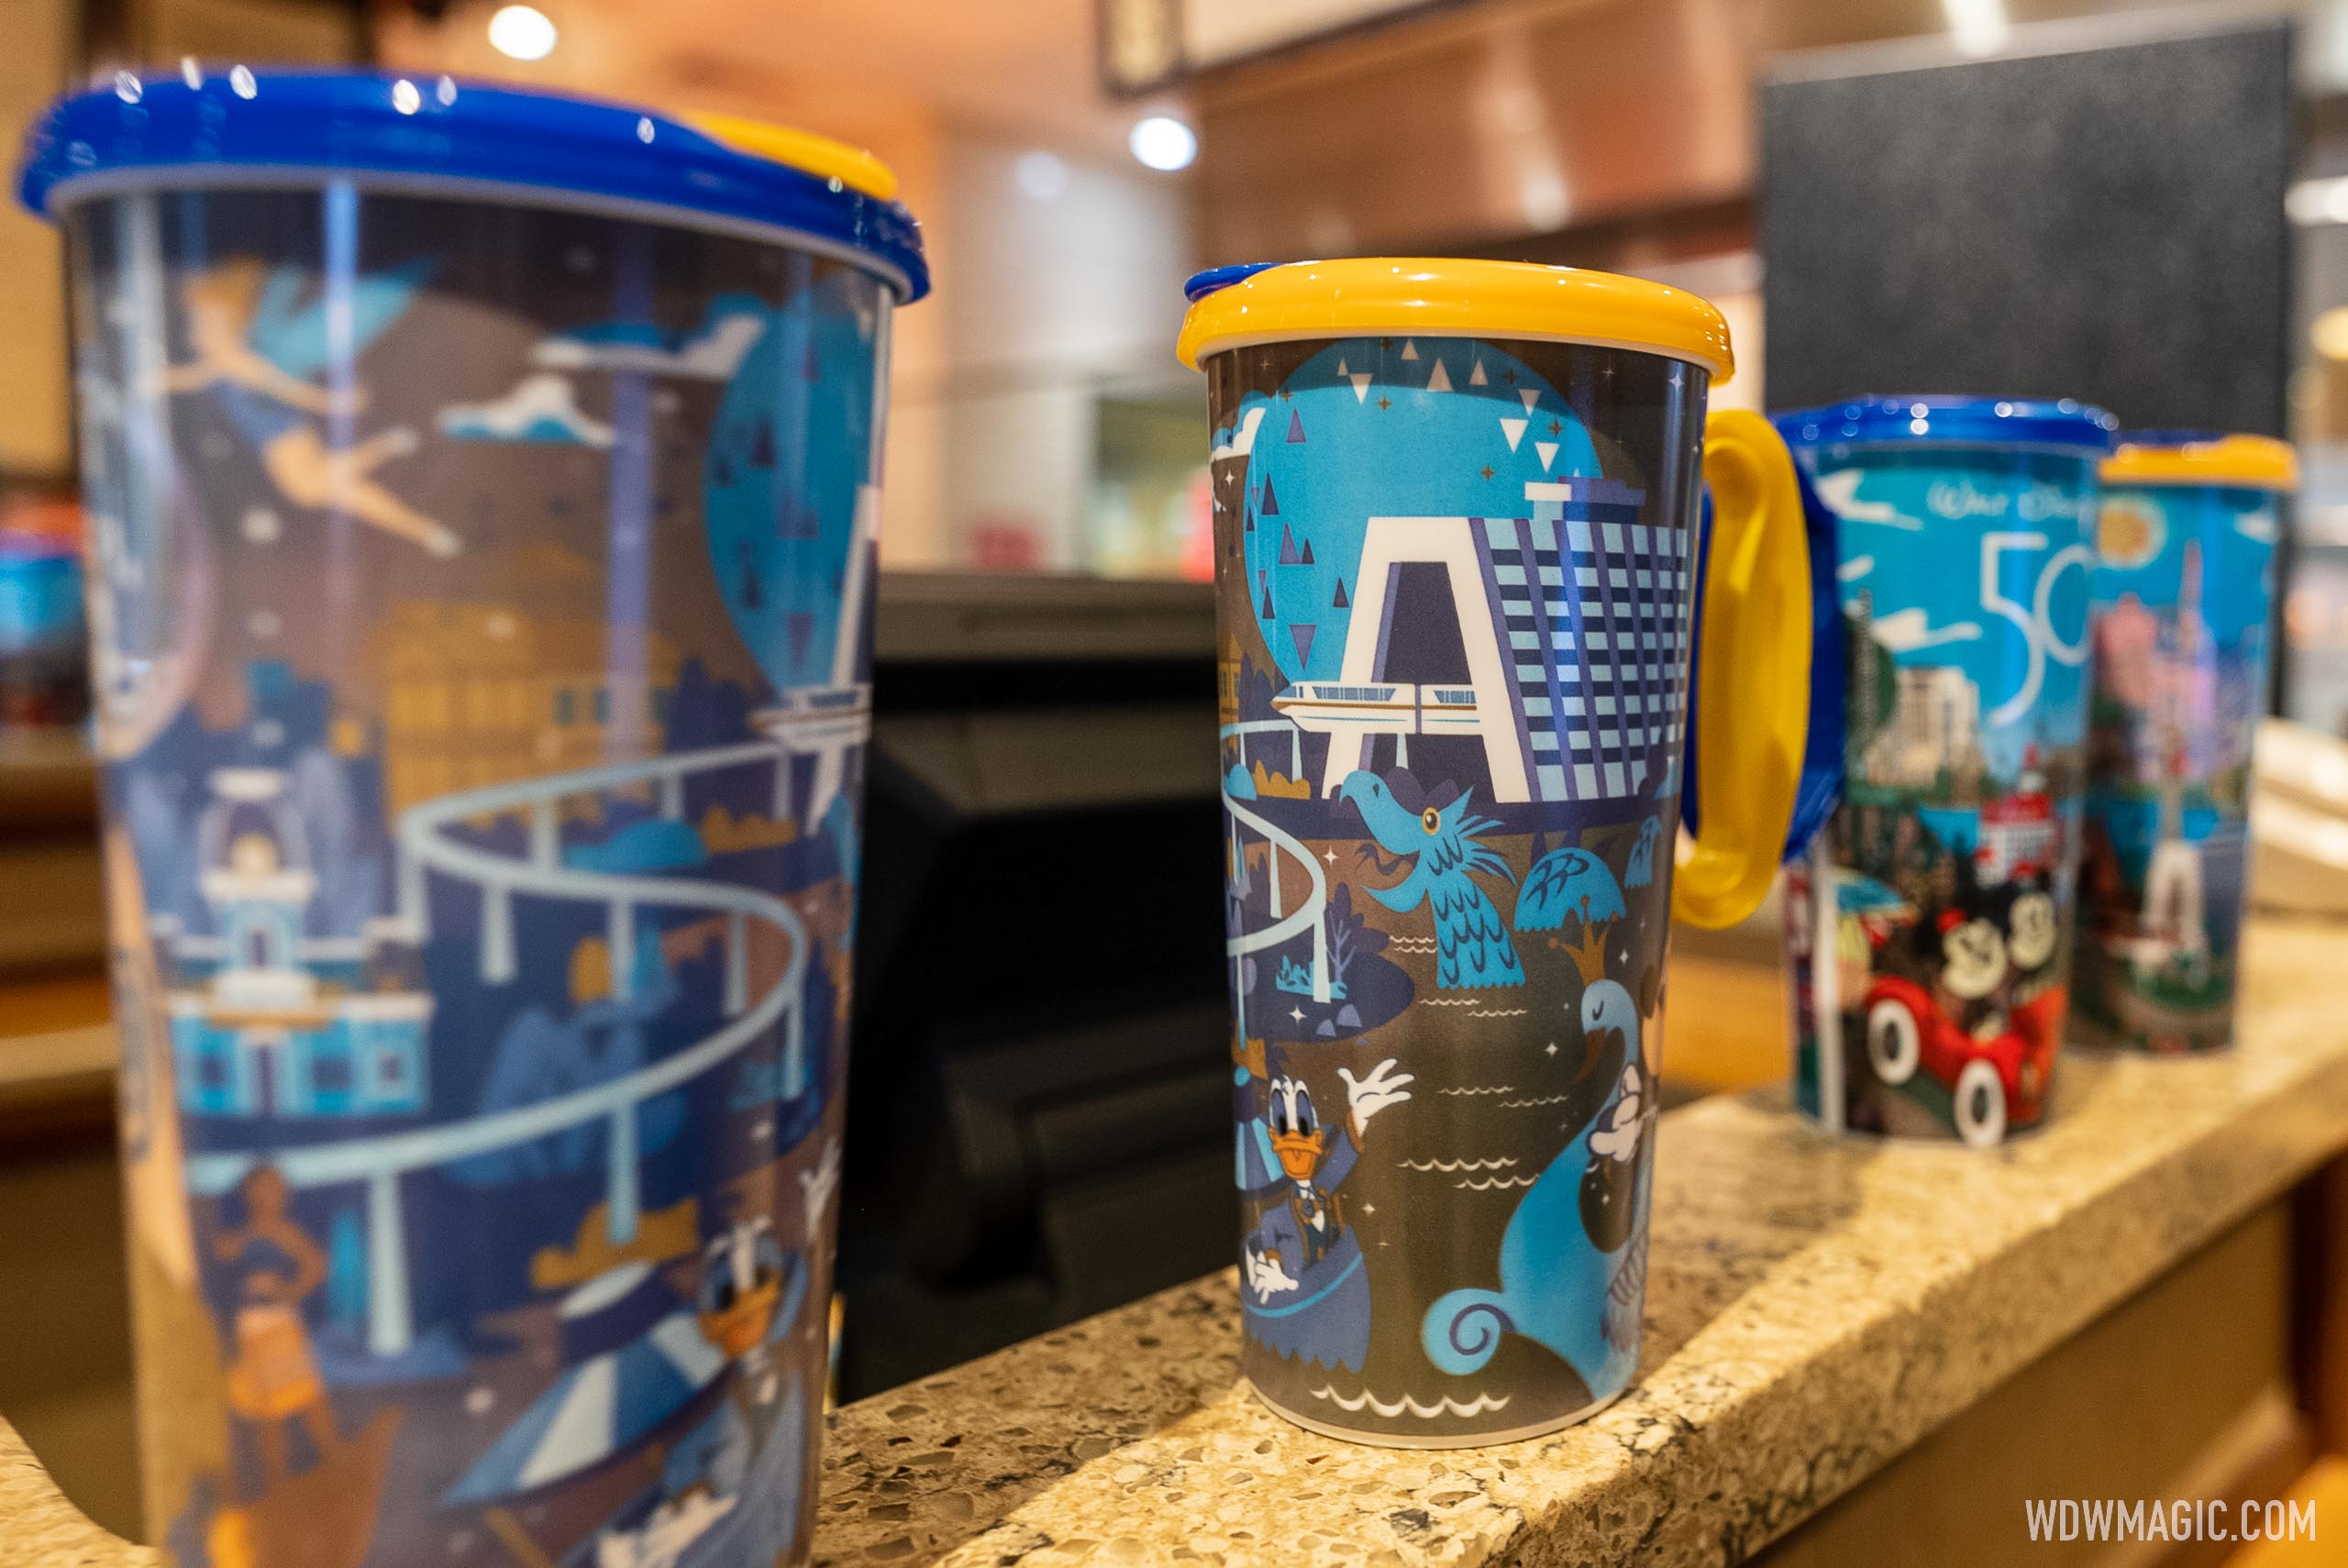 NEW Mickey Mouse Refillable Resort Mug Found at Disney World's All